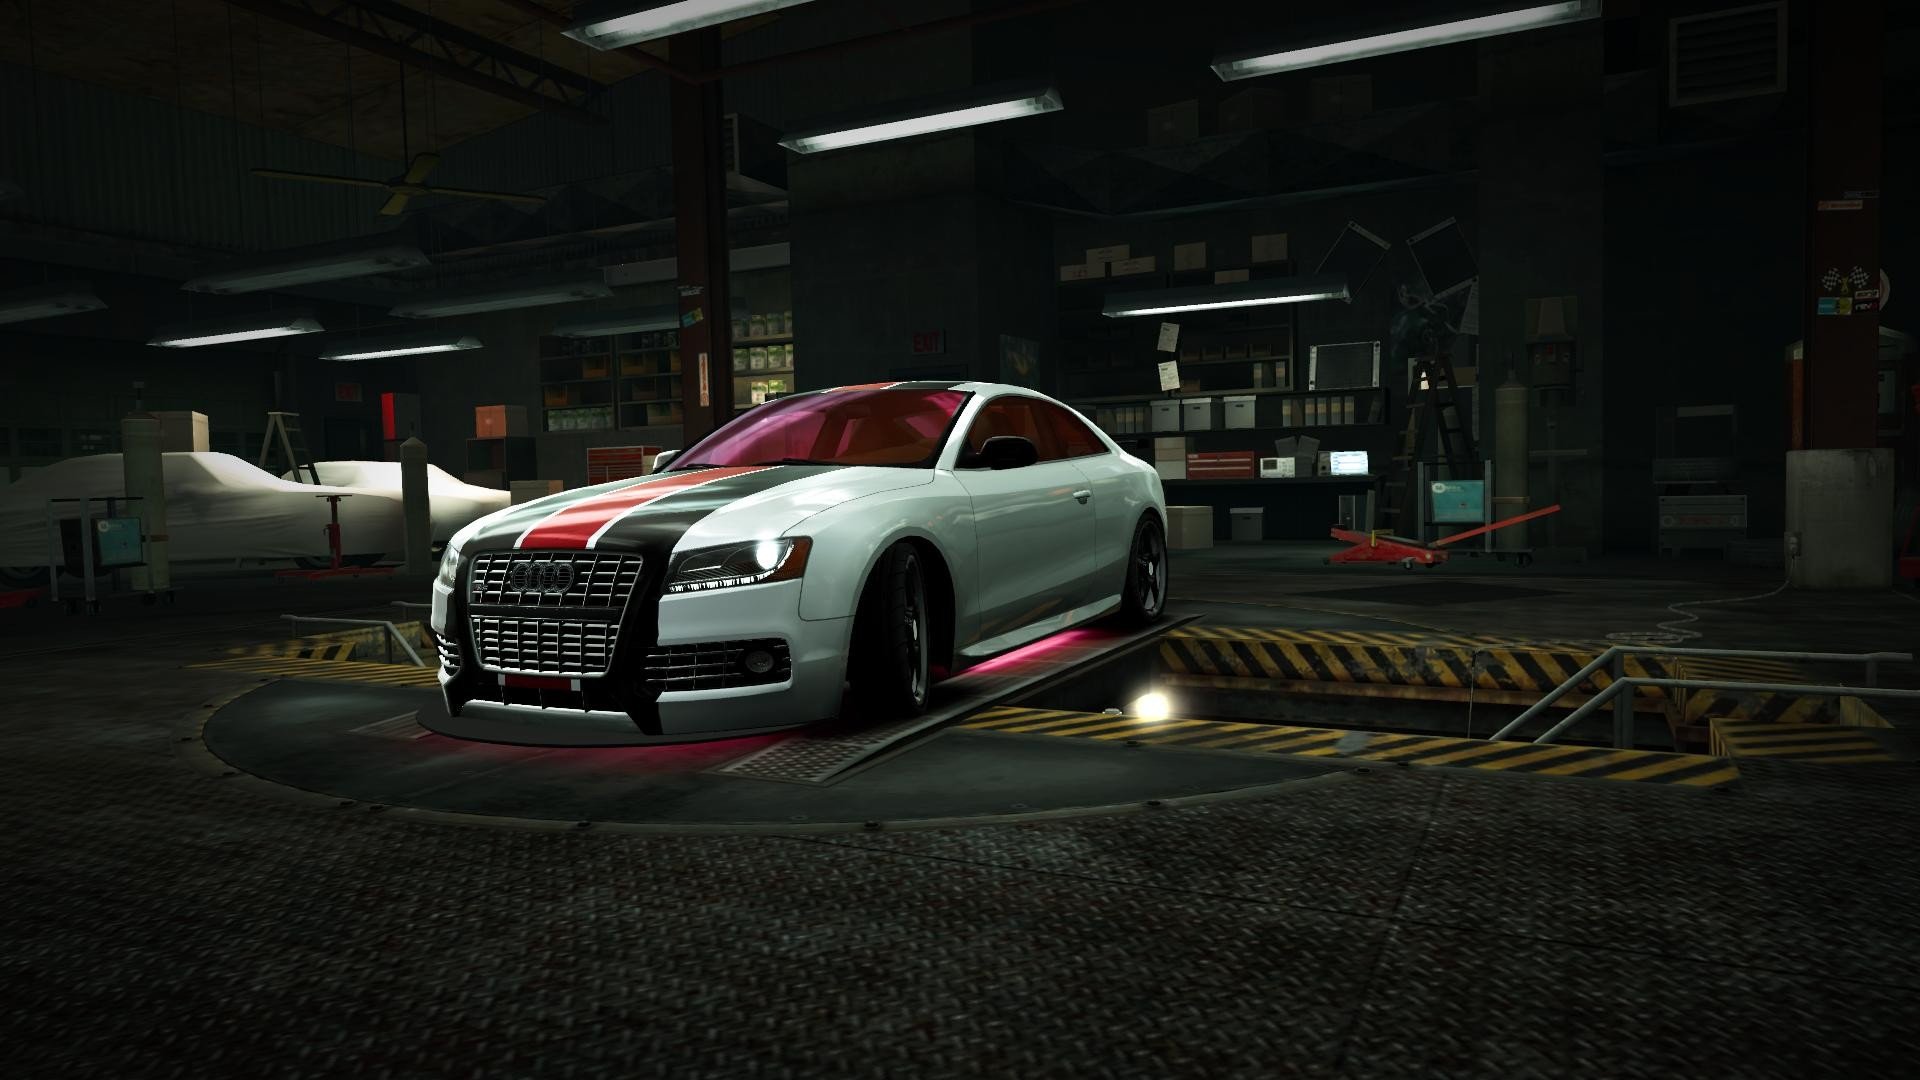 cars, Audi, S5, Need, For, Speed, World, Luxury, Sport, Cars, Game, Nfs Wallpaper